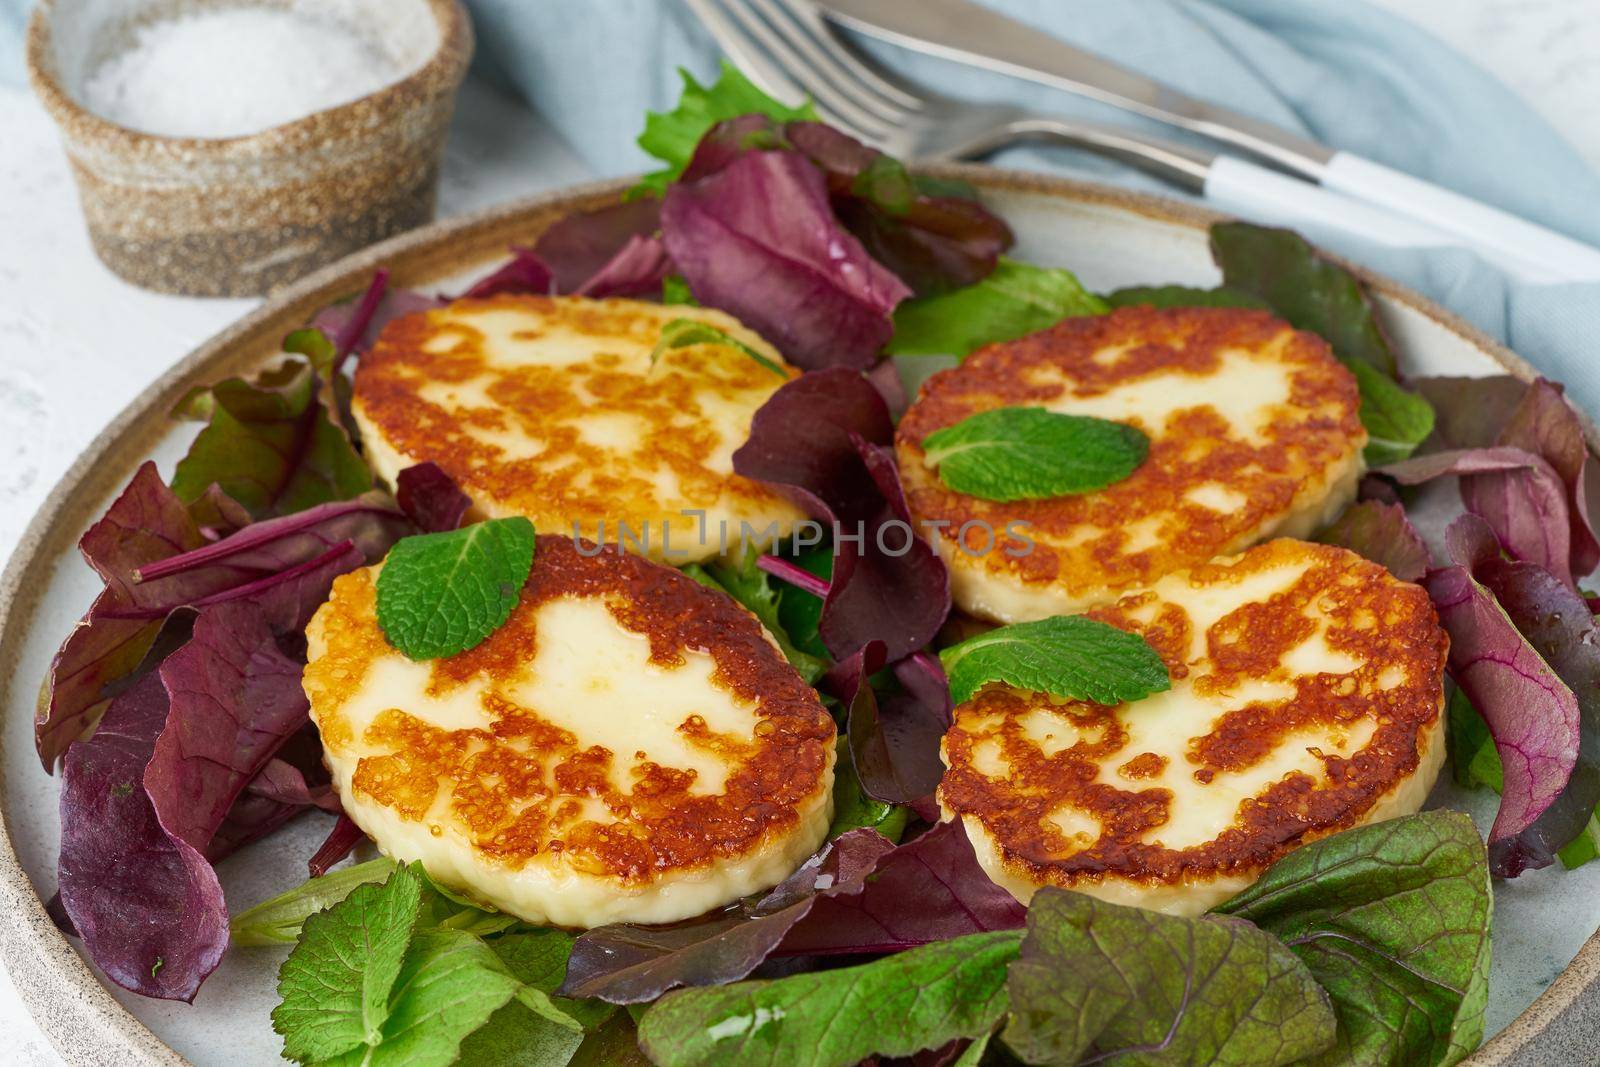 Cyprus roasted halloumi with salad mix, beet tops. Lchf, pegan, fodmap, paleo, scd, keto, ketogenic diet. Balanced food, clean eating recipe. White background, side view